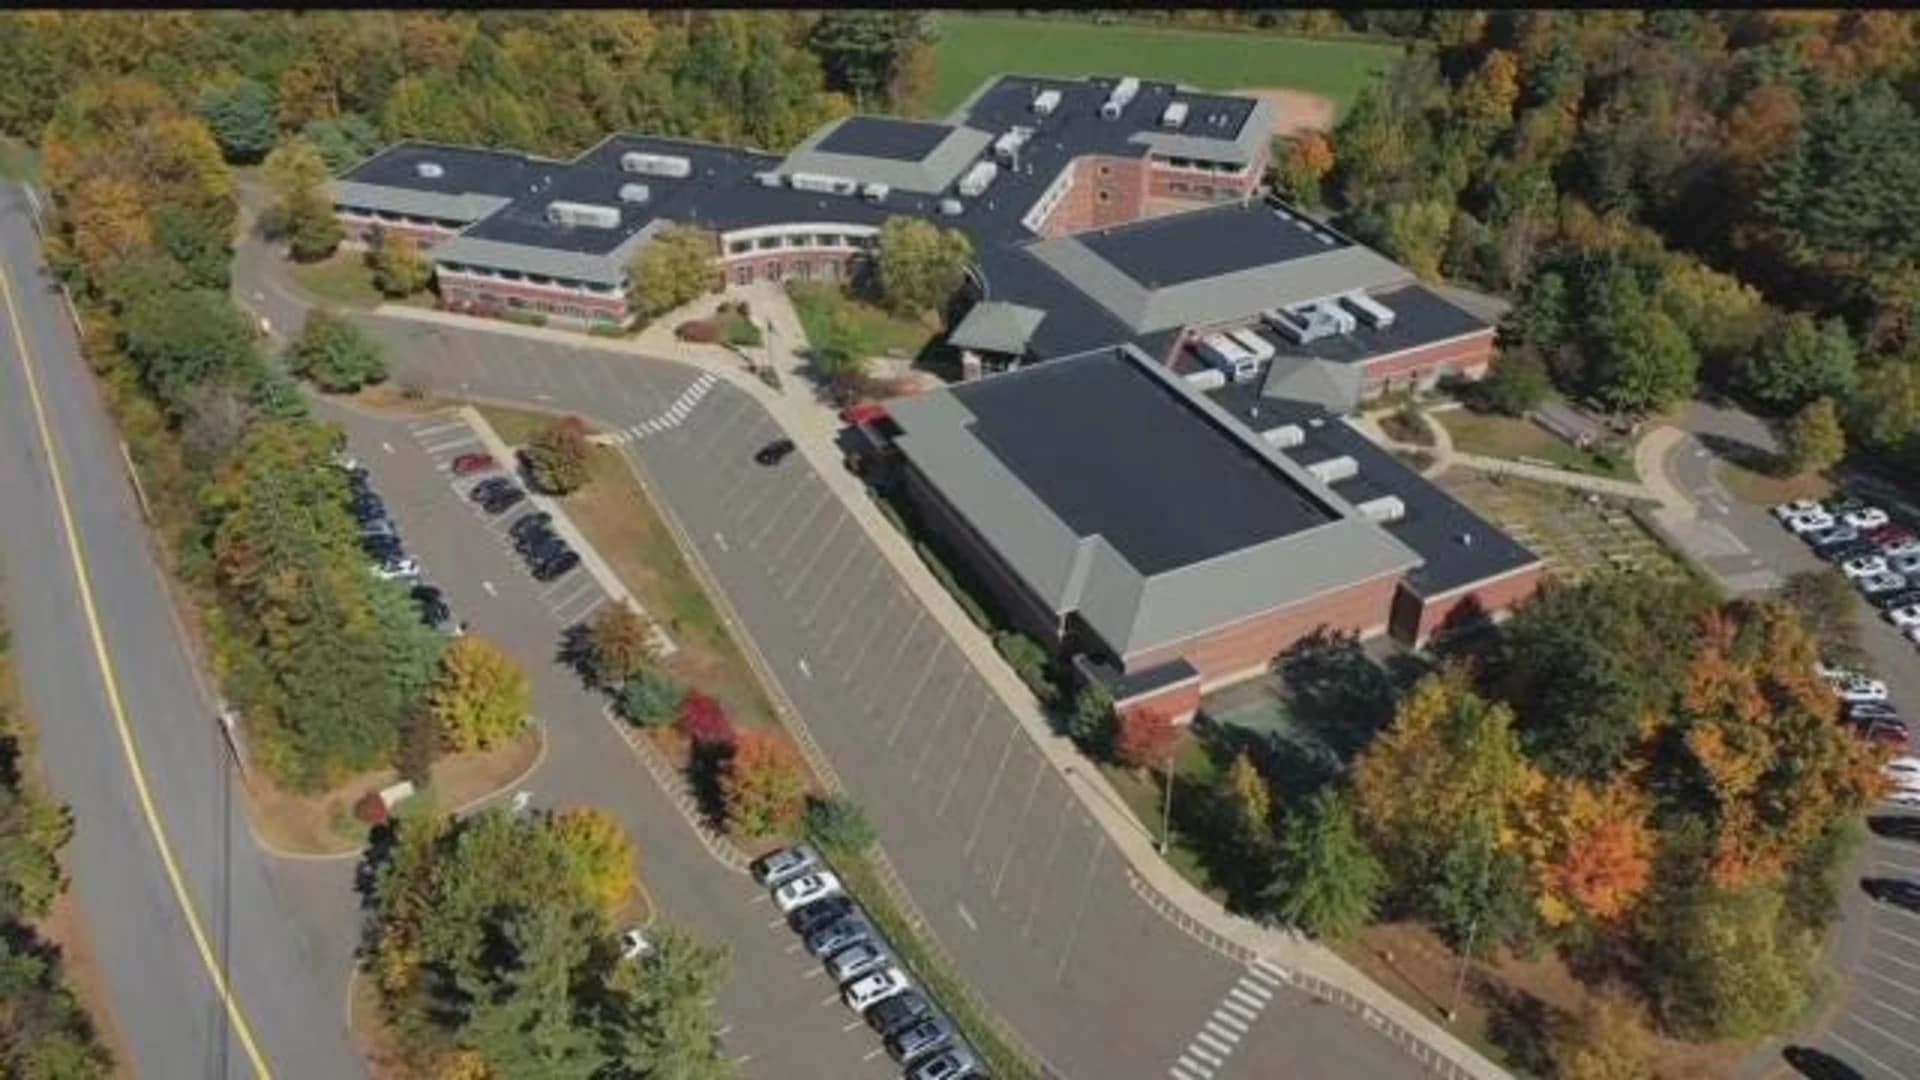 Principal of Shelton school says spitting incident was not racially motivated